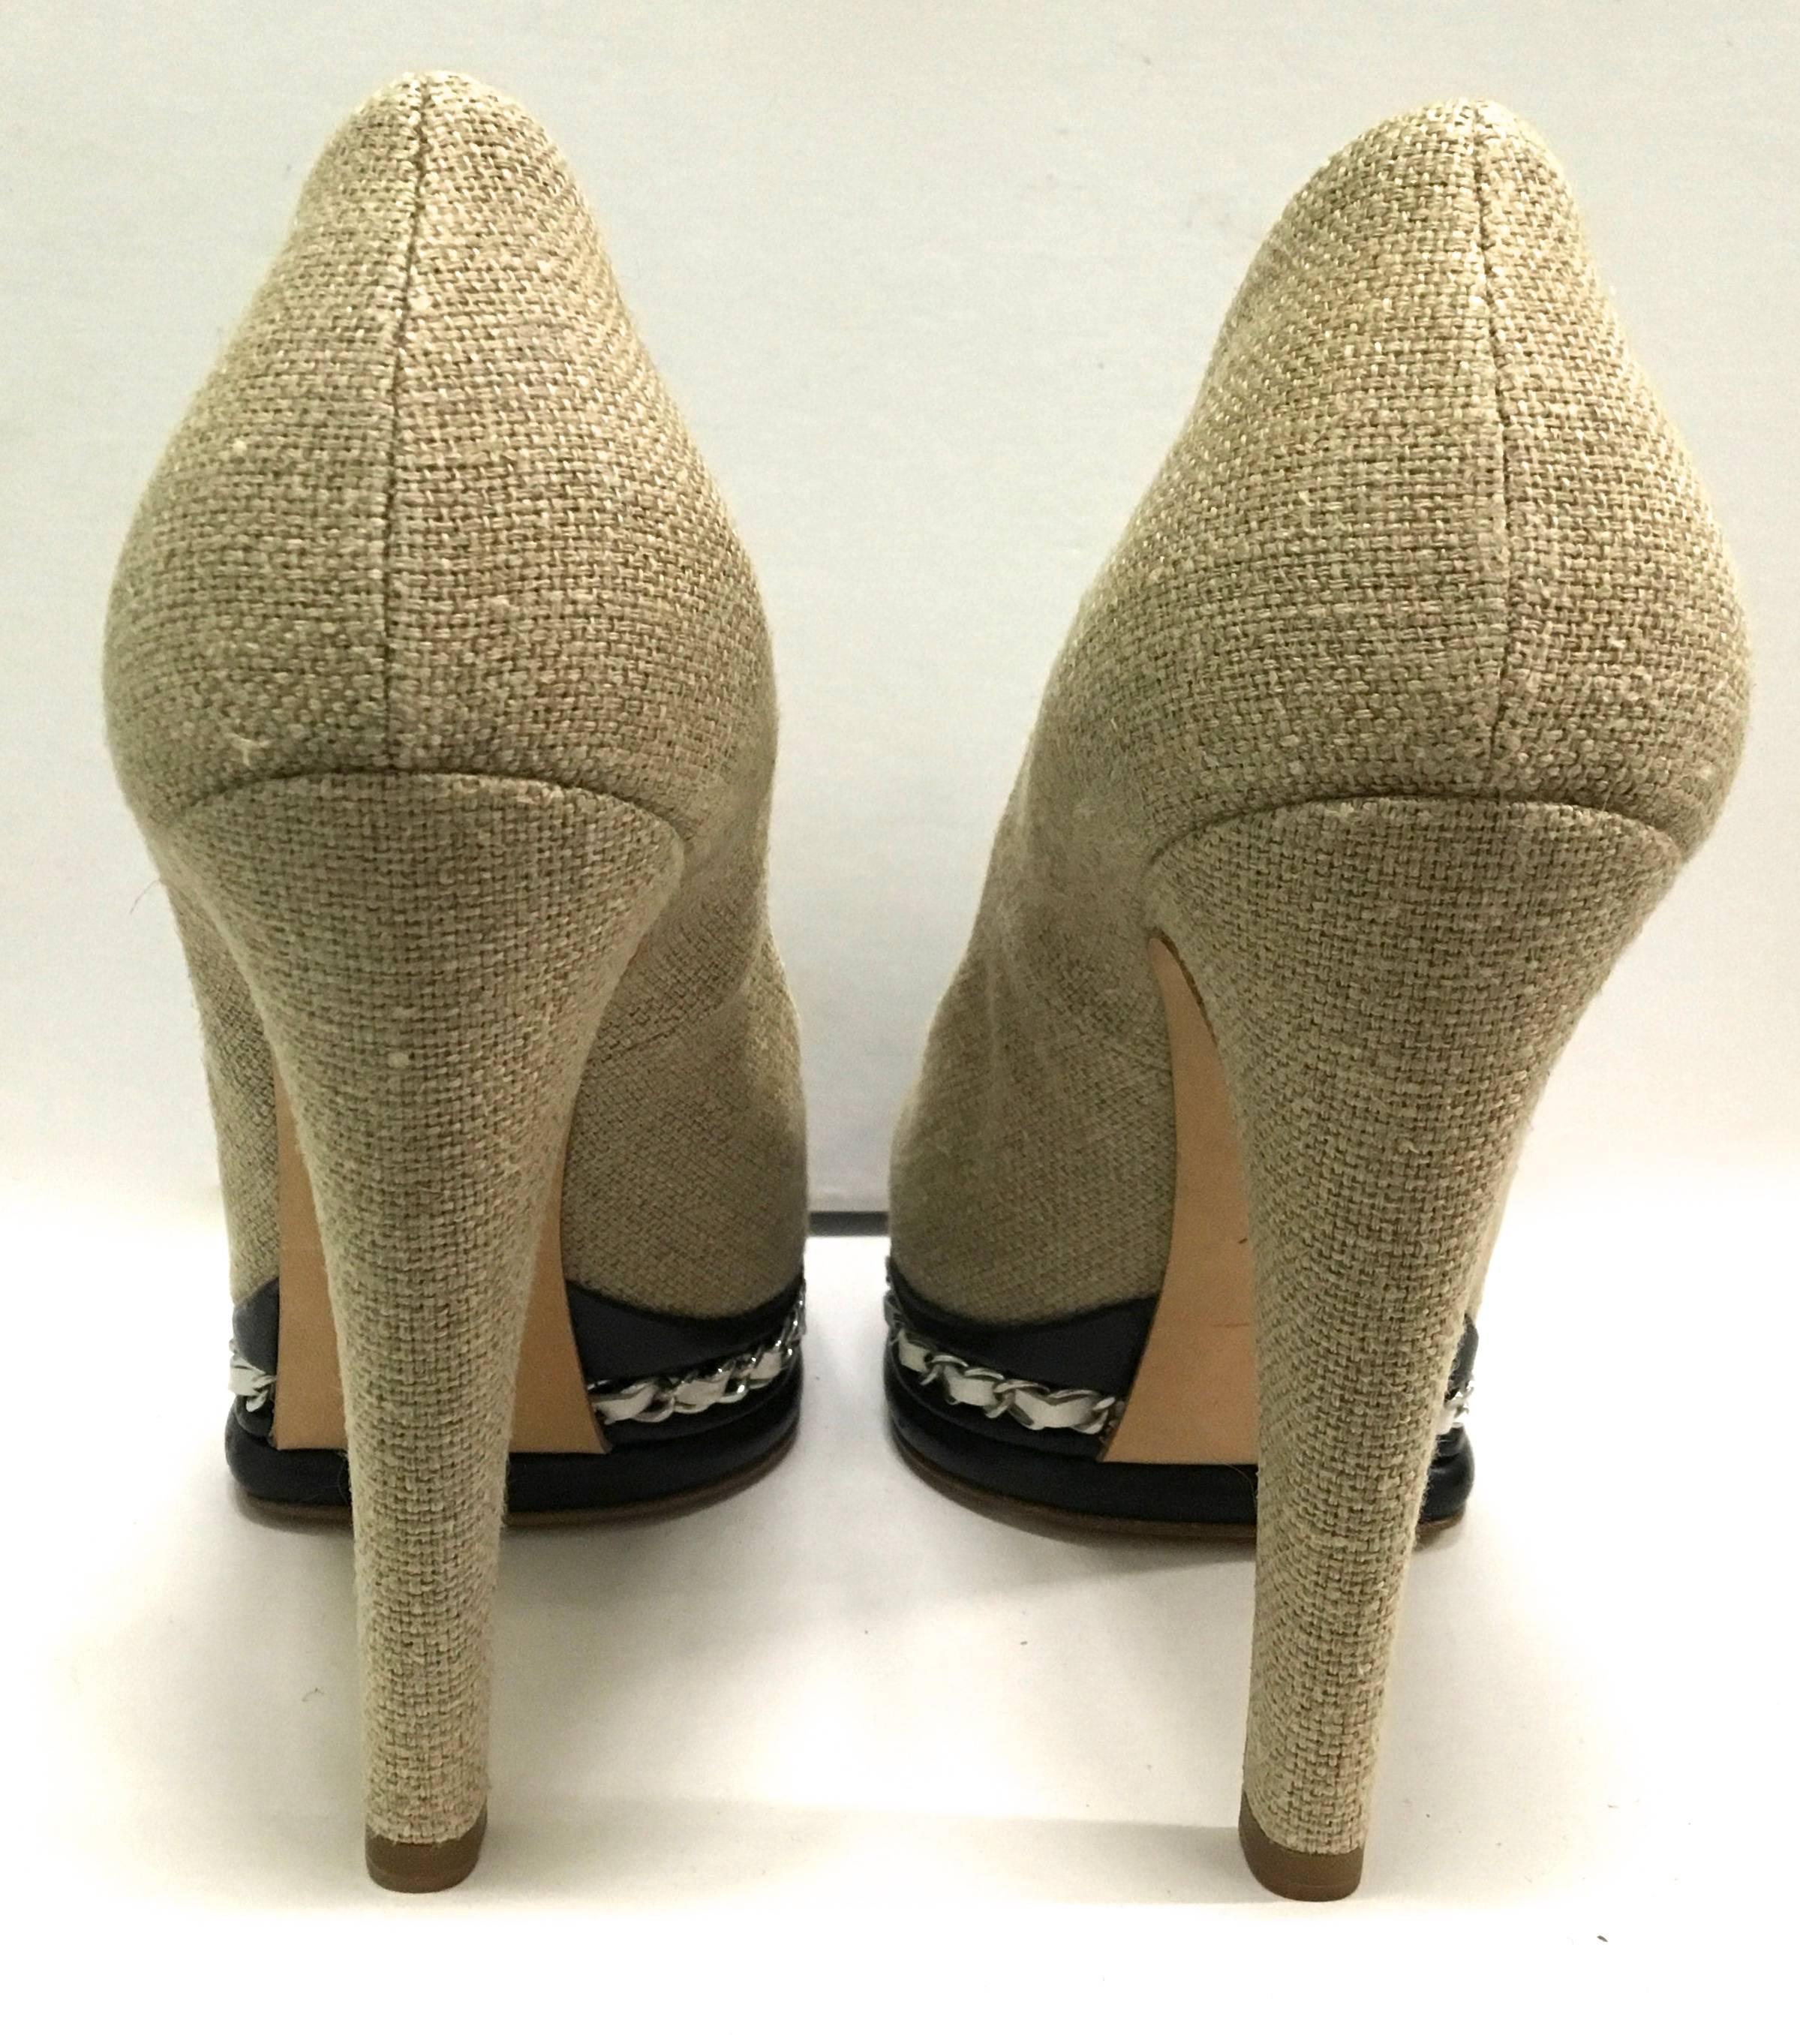 Presented here is a pair of beautiful Chanel high heels. The pair of heels is comprised of tan canvas on the exterior with black leather toes. The soles are black and also have a band of the iconic Chanel leather and metal chain wrapping around the